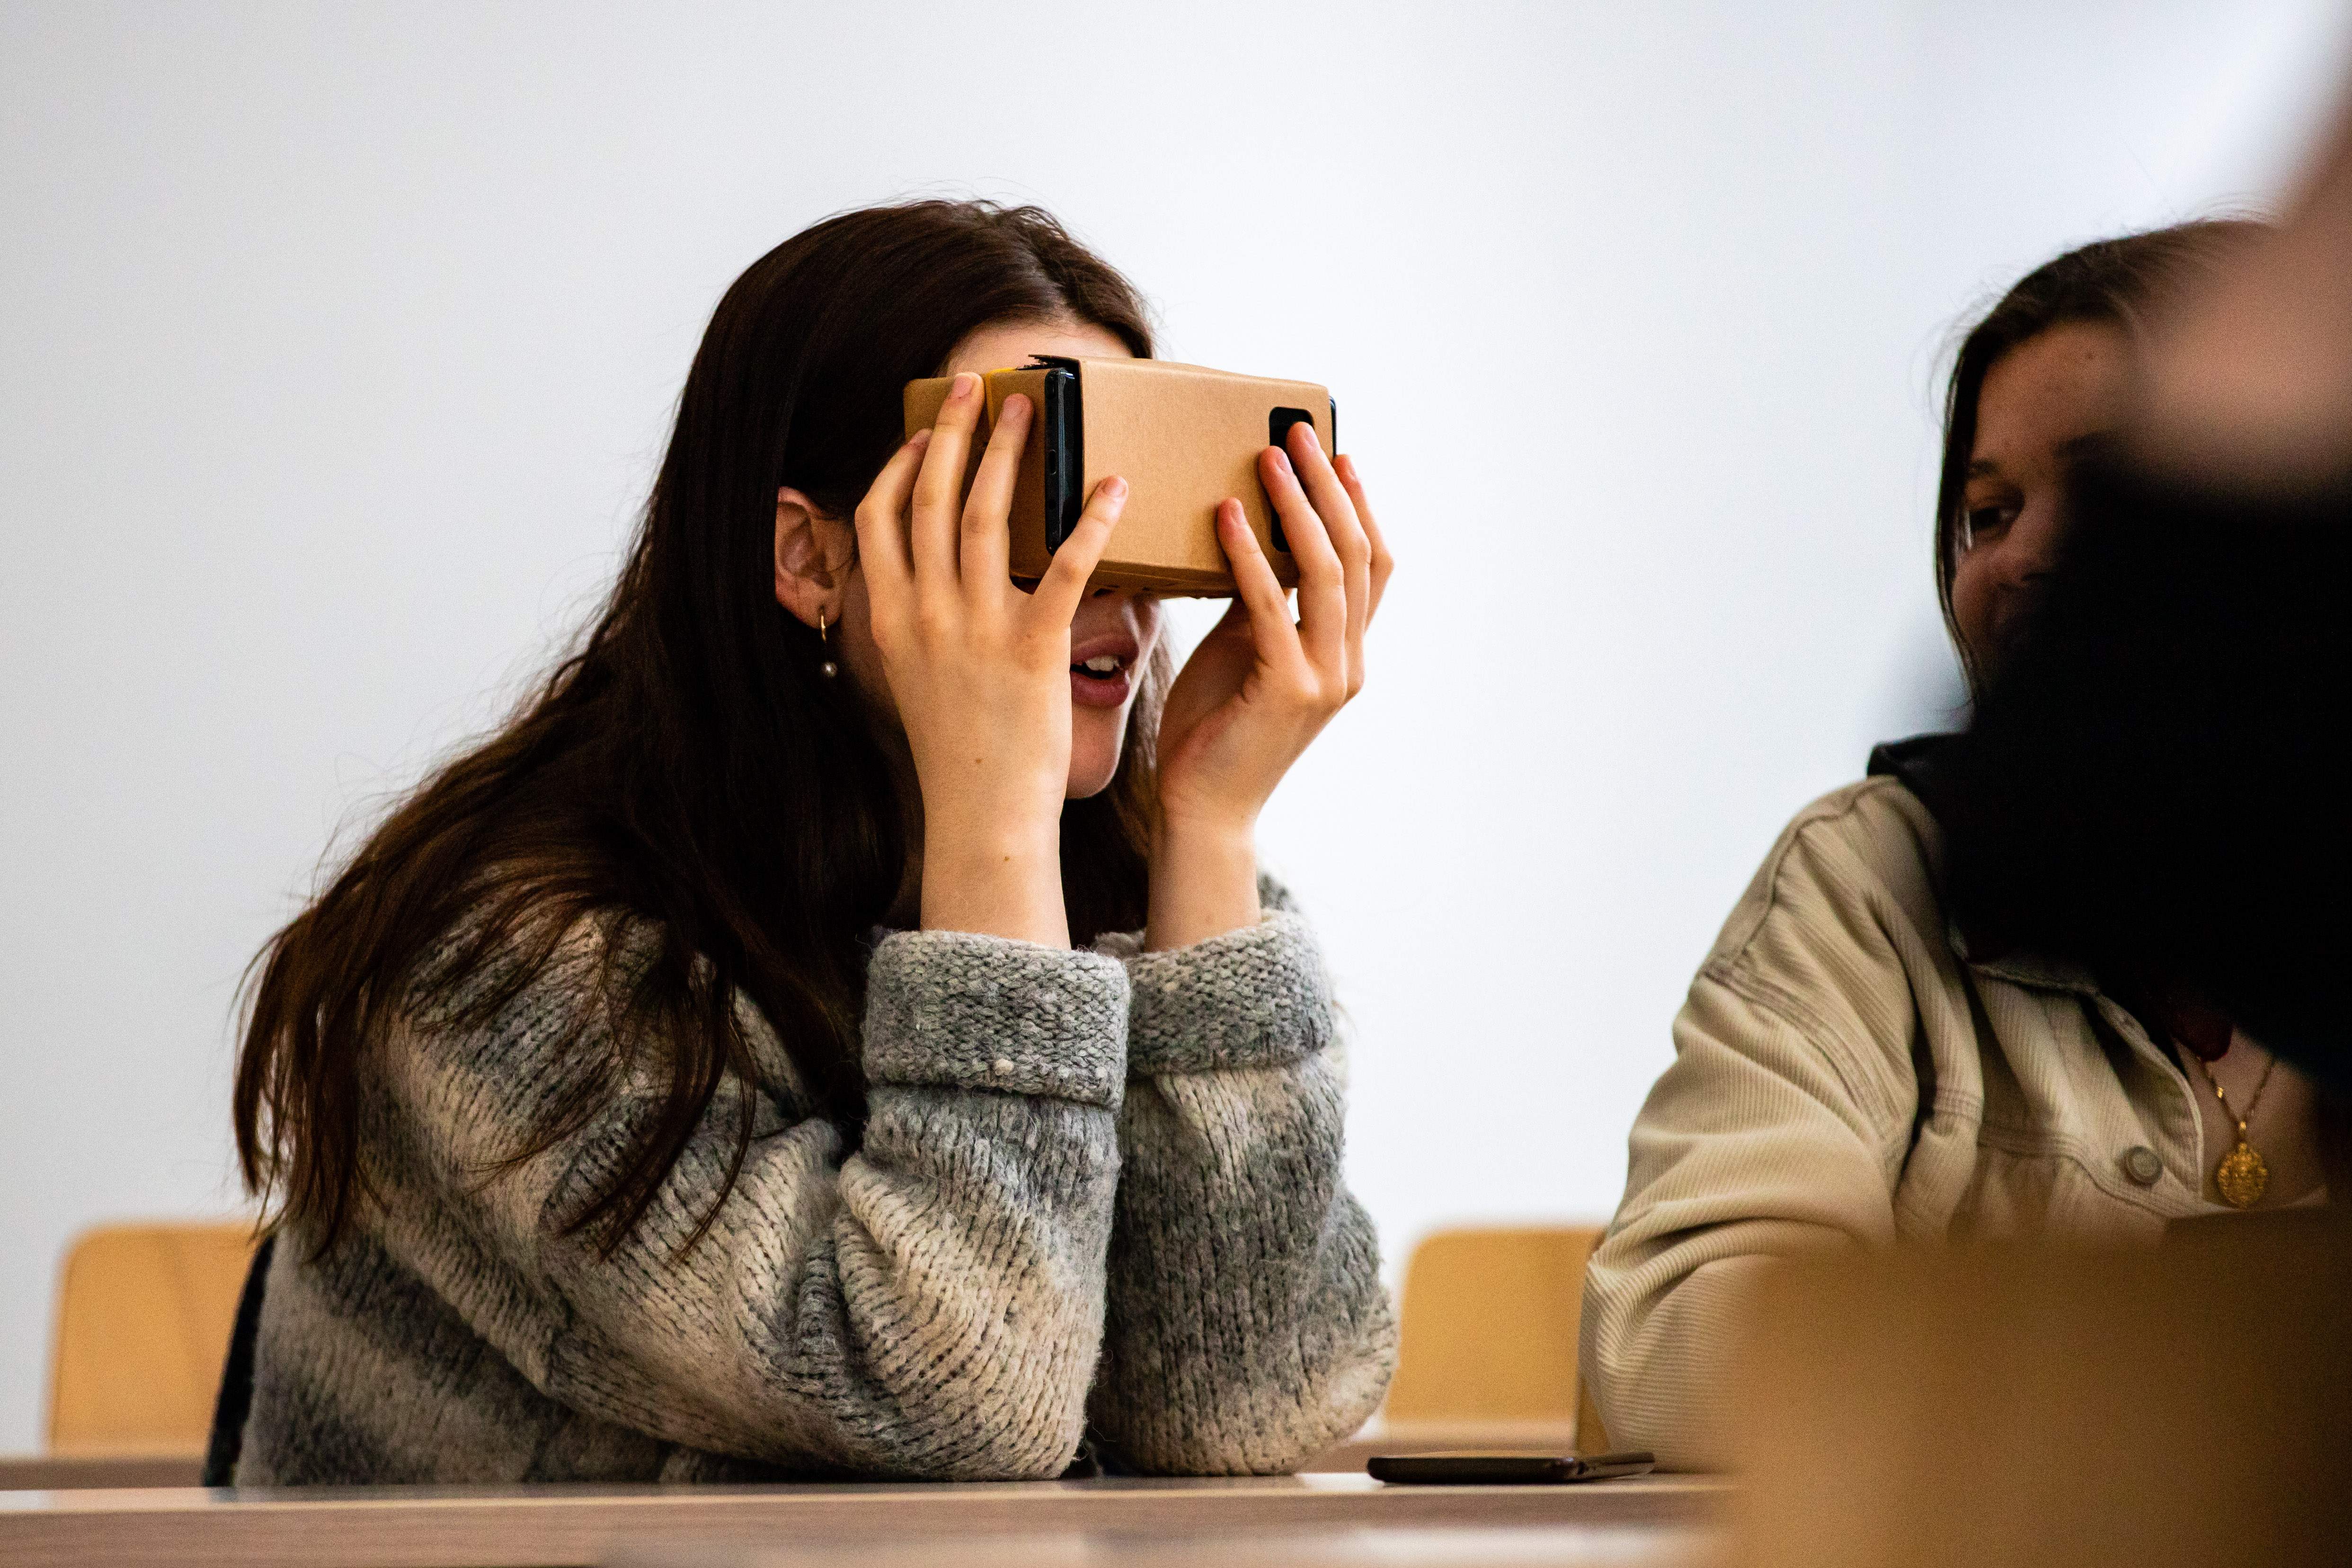 Image of a young woman using a VR headset